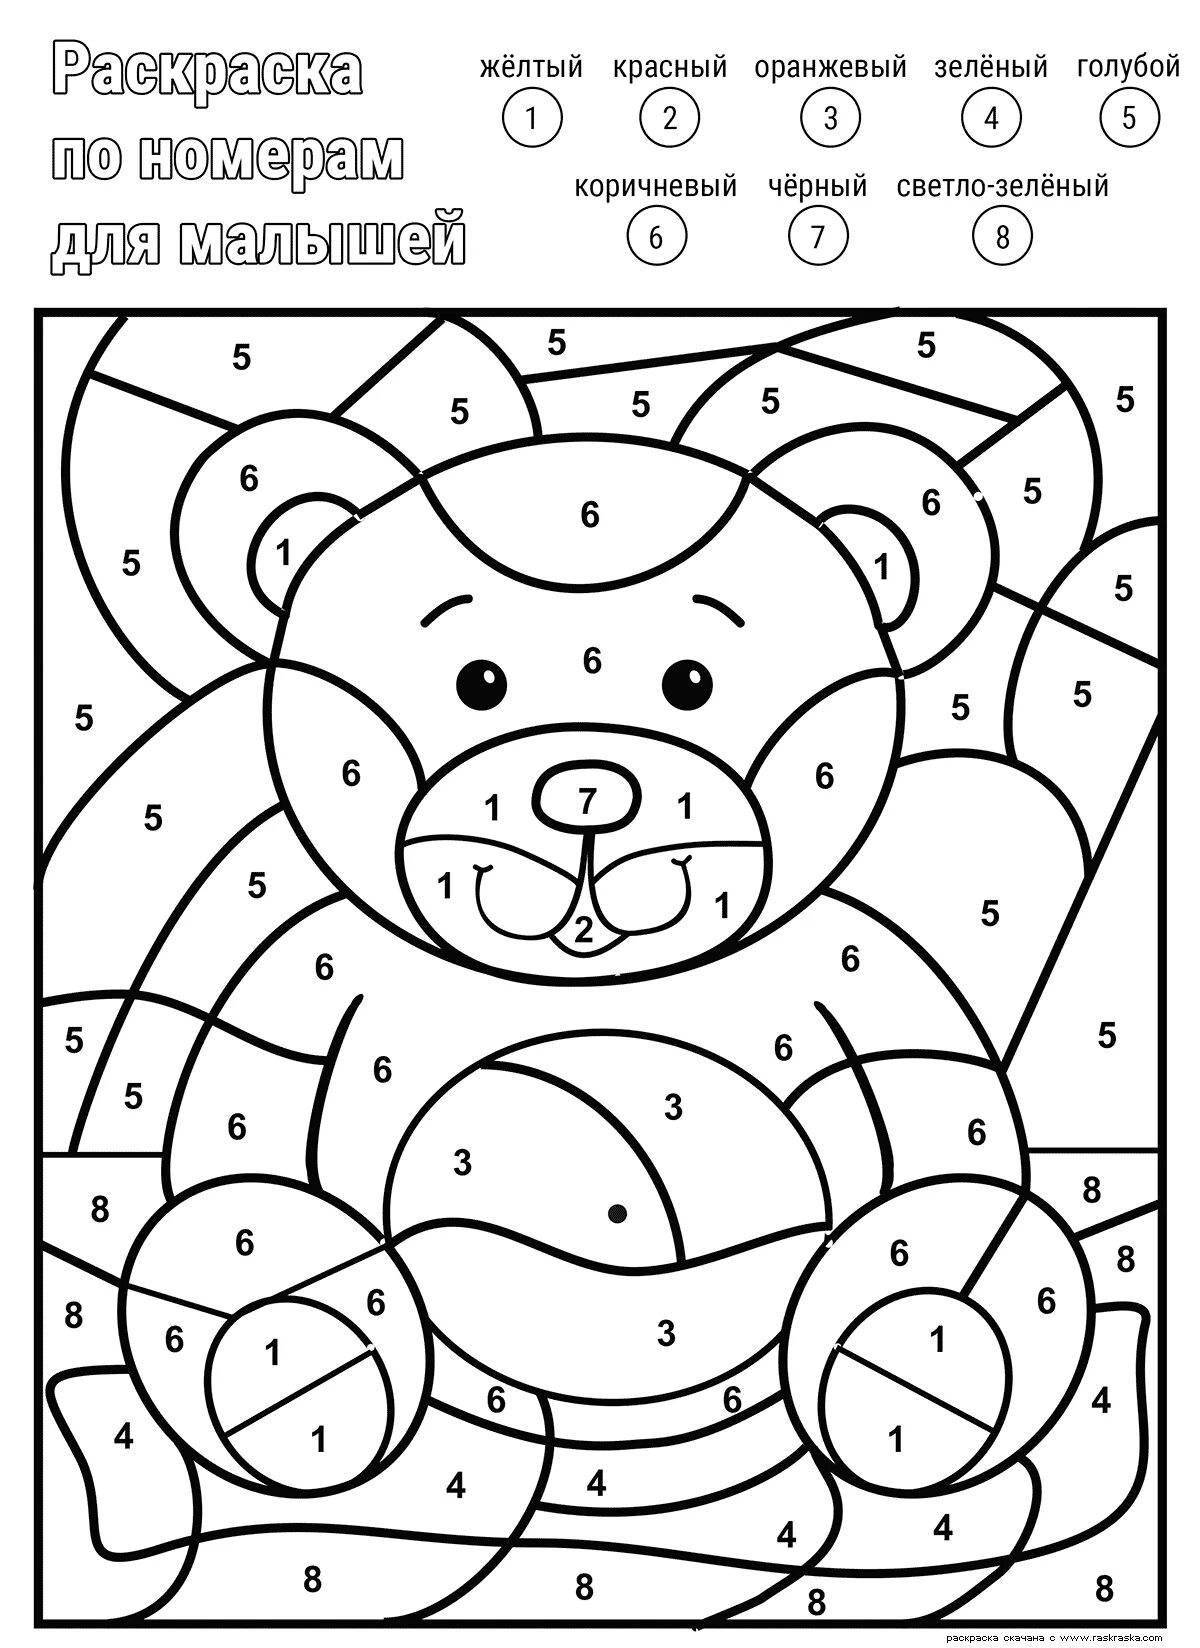 Fun coloring by numbers for children 5-6 years old